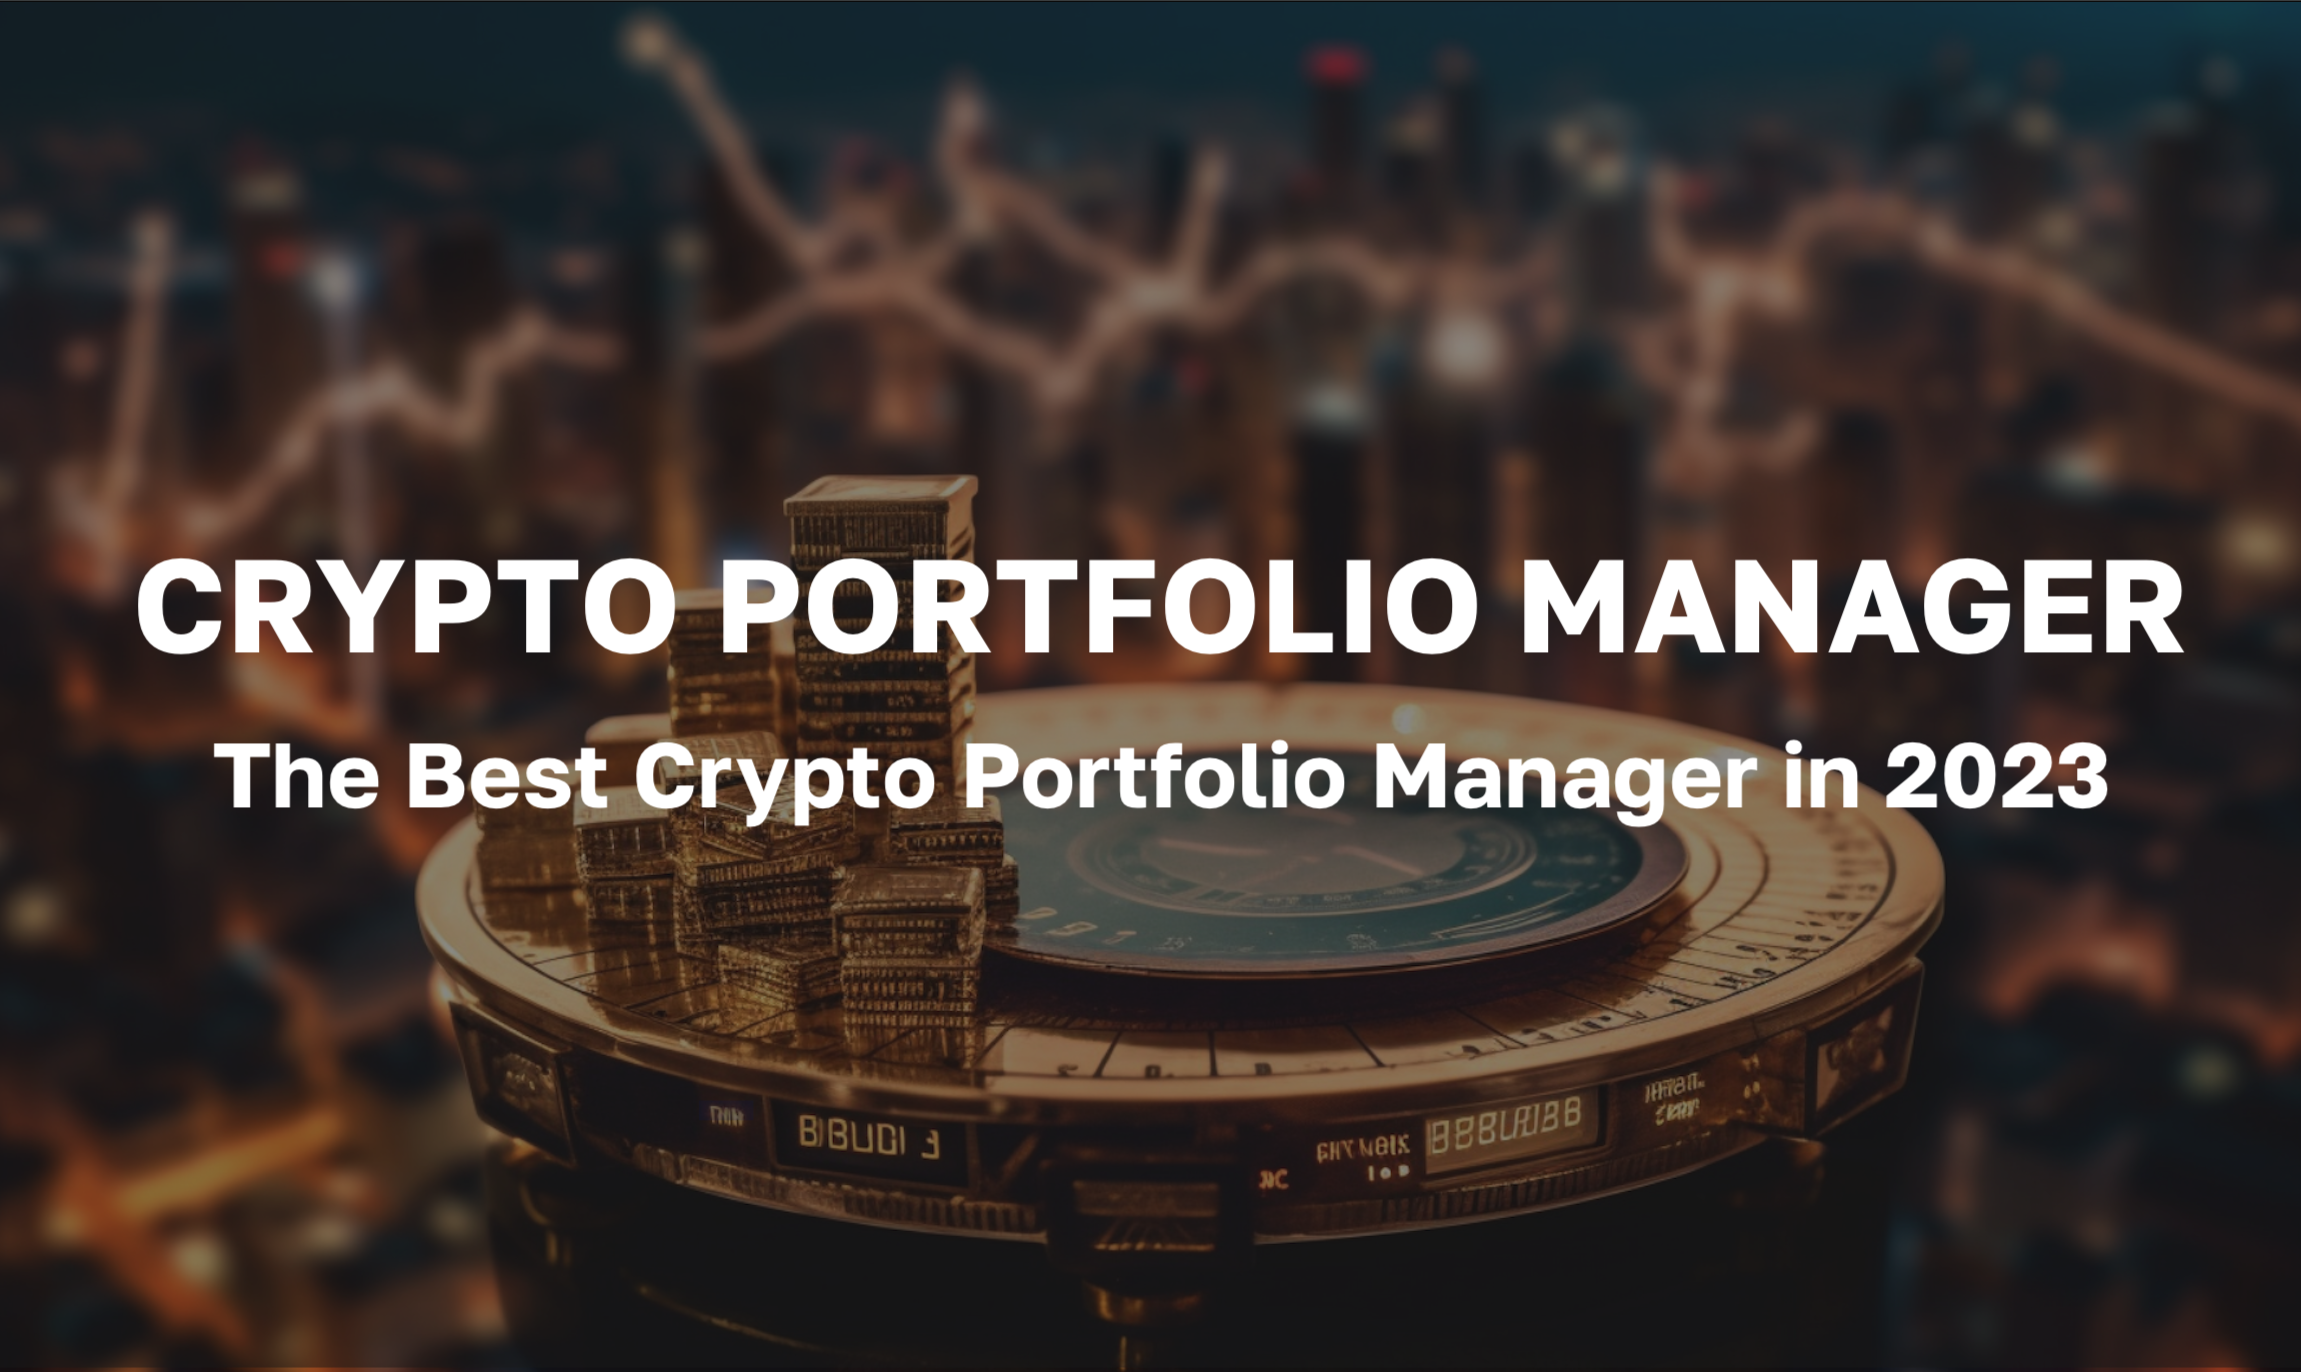 The Best Crypto Portfolio Manager for Traders in 2023